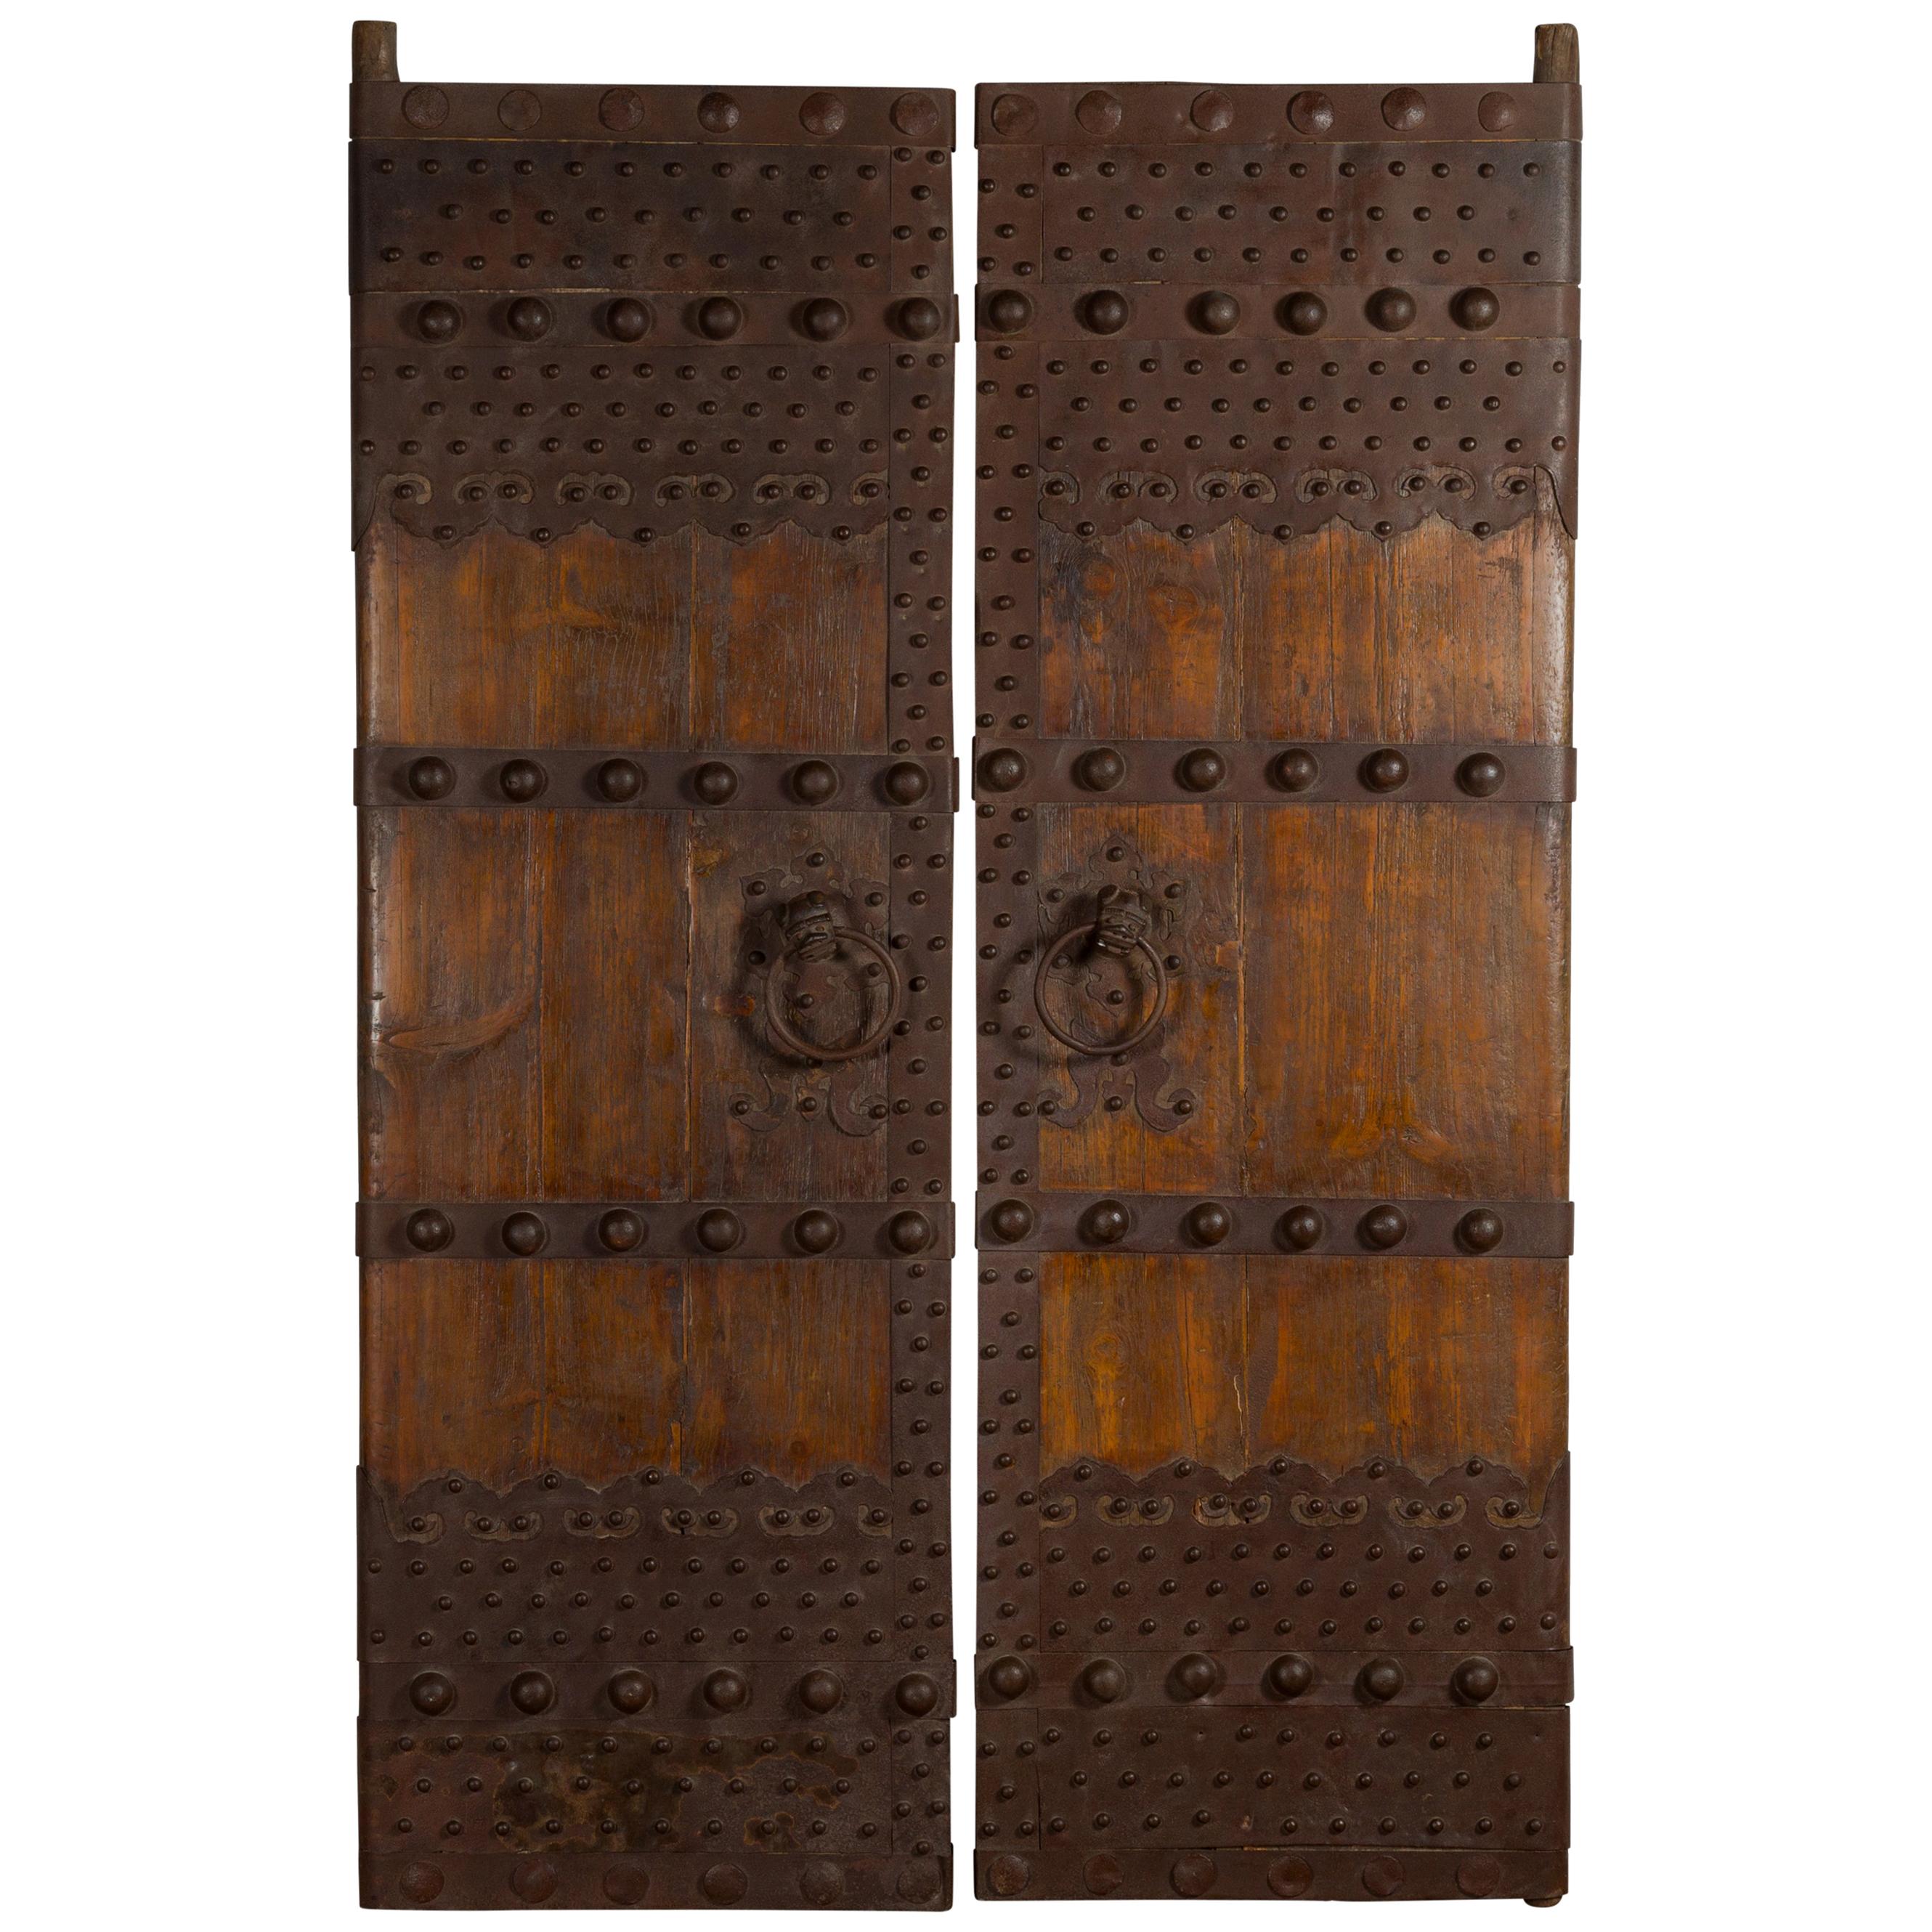 Pair of Chinese Qing Dynasty Palace Doors with Iron Hardware and Dark Patina